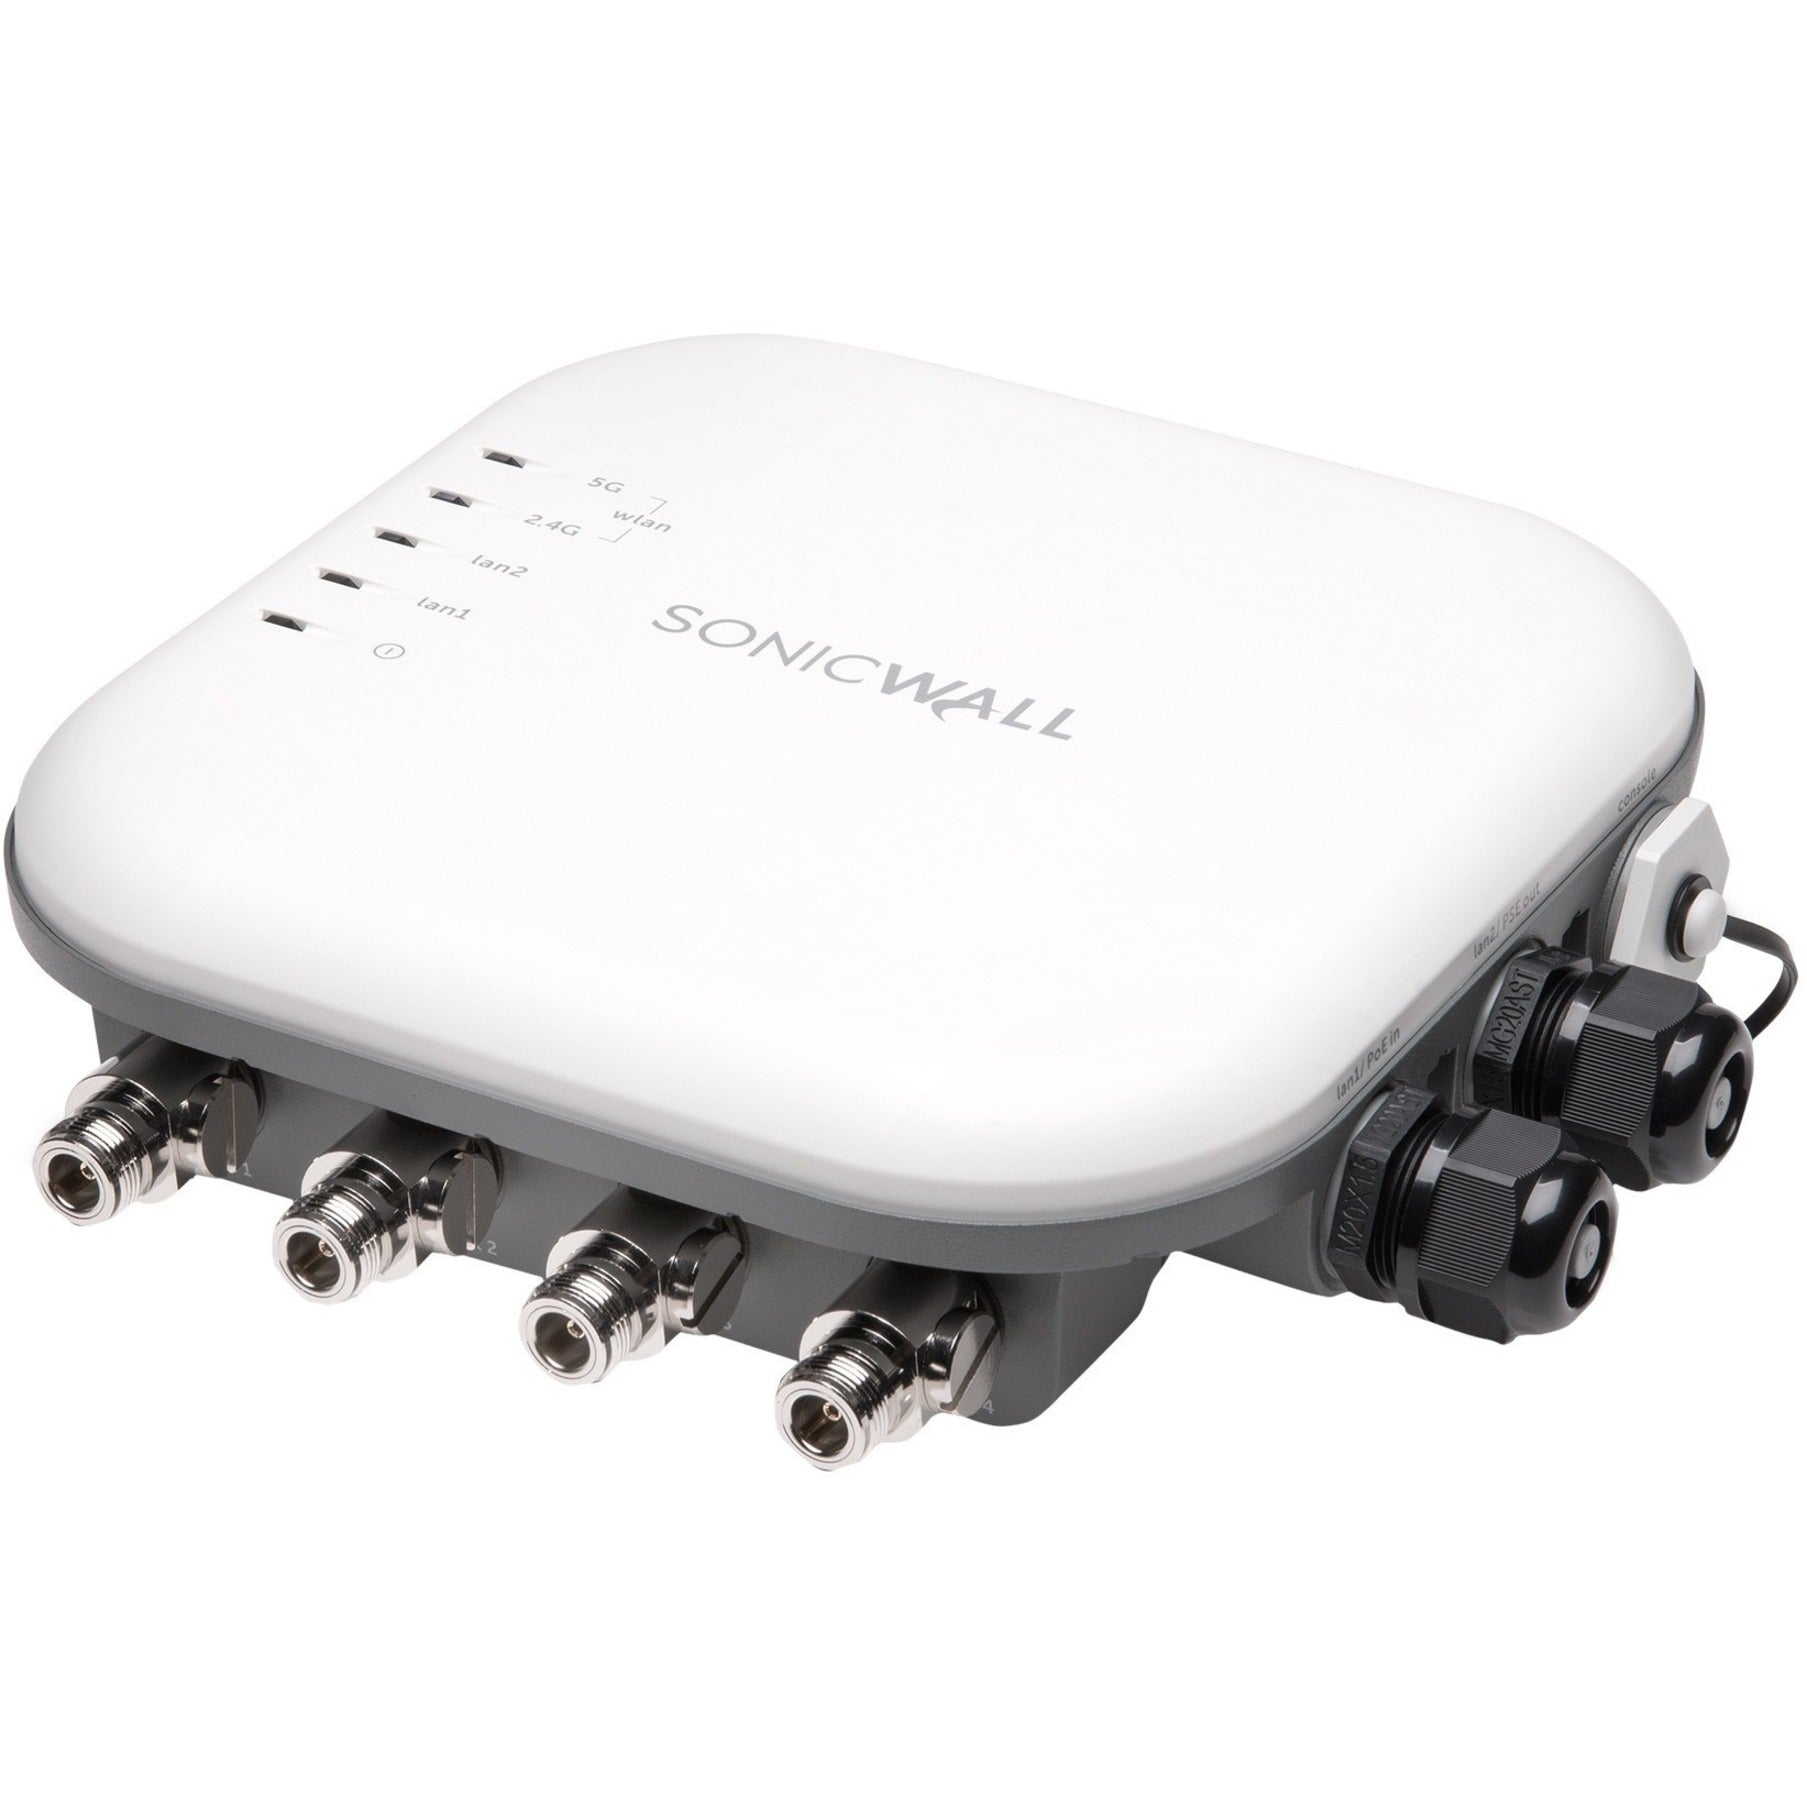 SonicWall 01-SSC-2558 SonicWave 432o Wireless Access Point, Secure Upgrade Plus with 3-Year Activation and 24x7 Support